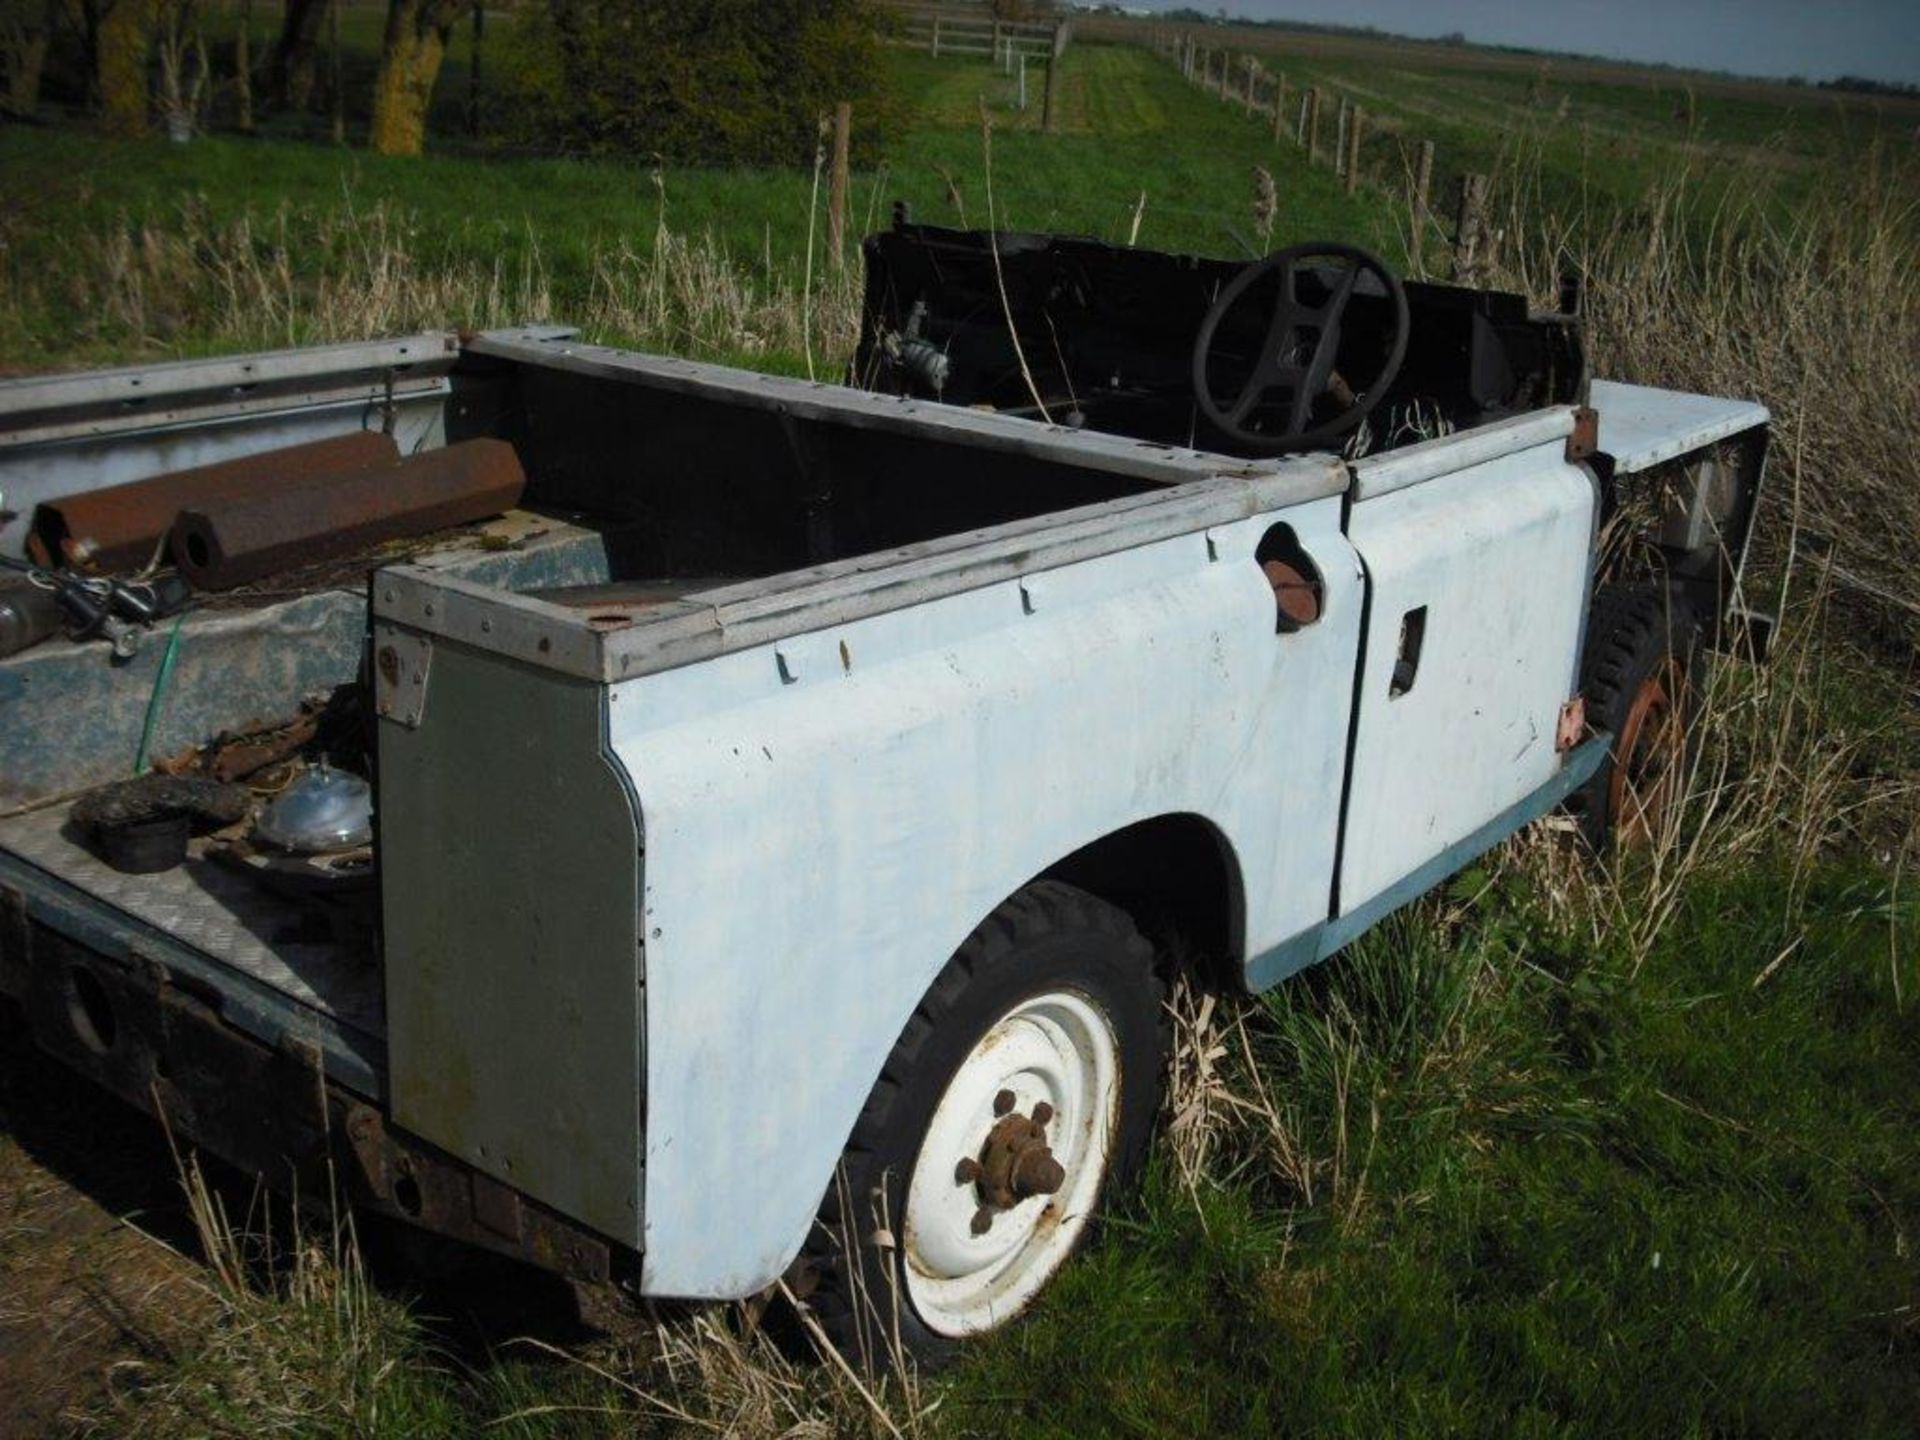 1979 Land Rover 88 Series III" - Image 6 of 8